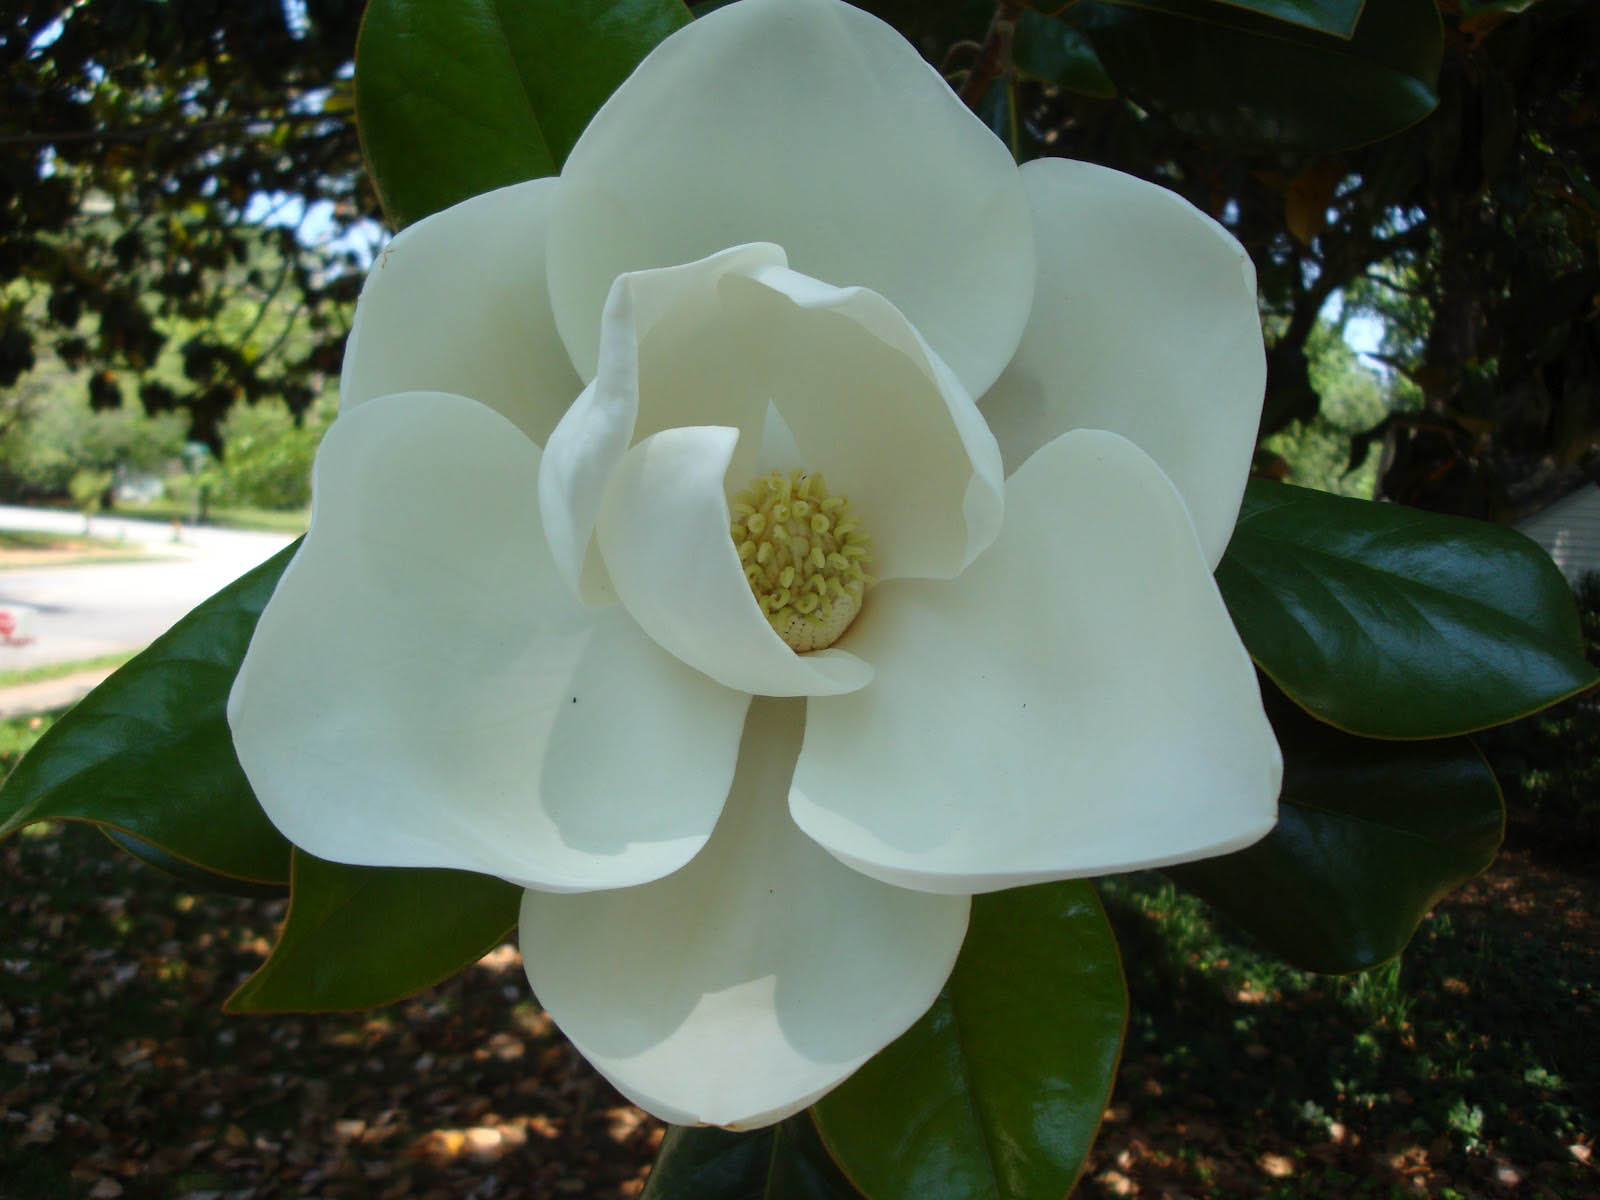 Magnolia Blossom Wallpaper Image Photos Pictures And Background